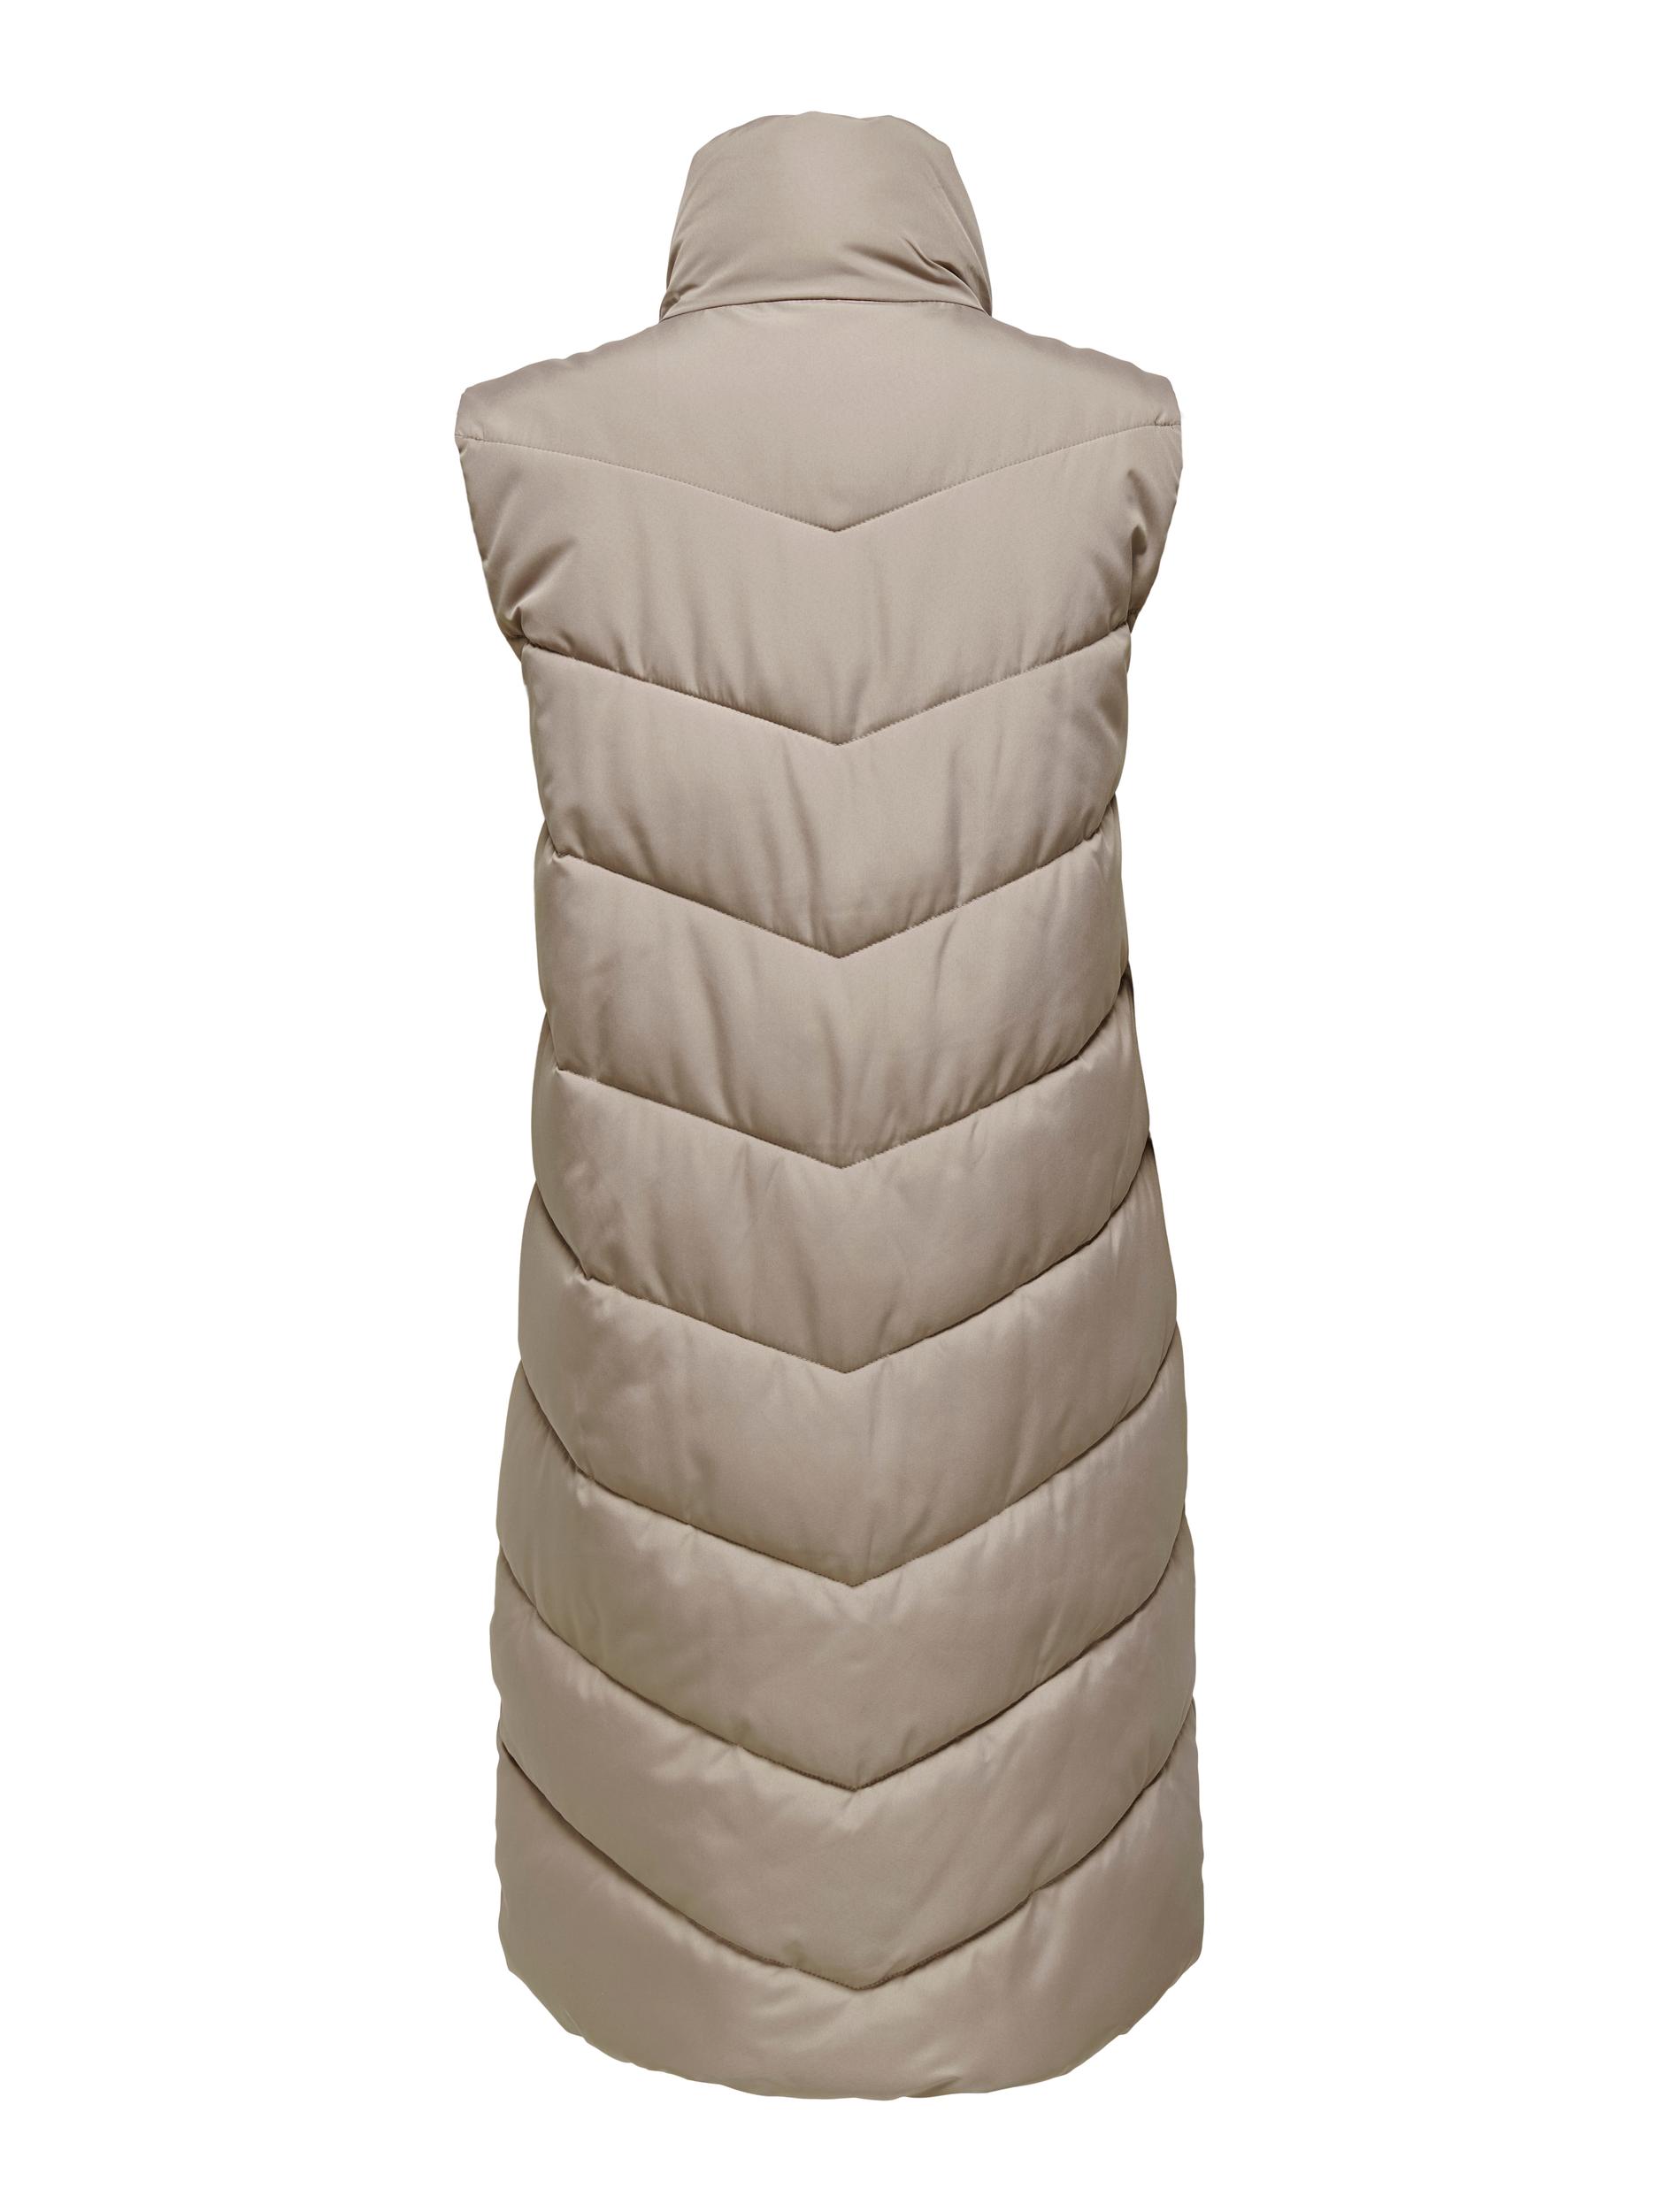 JDY Finno Lang Vest, Simply Taupe, S